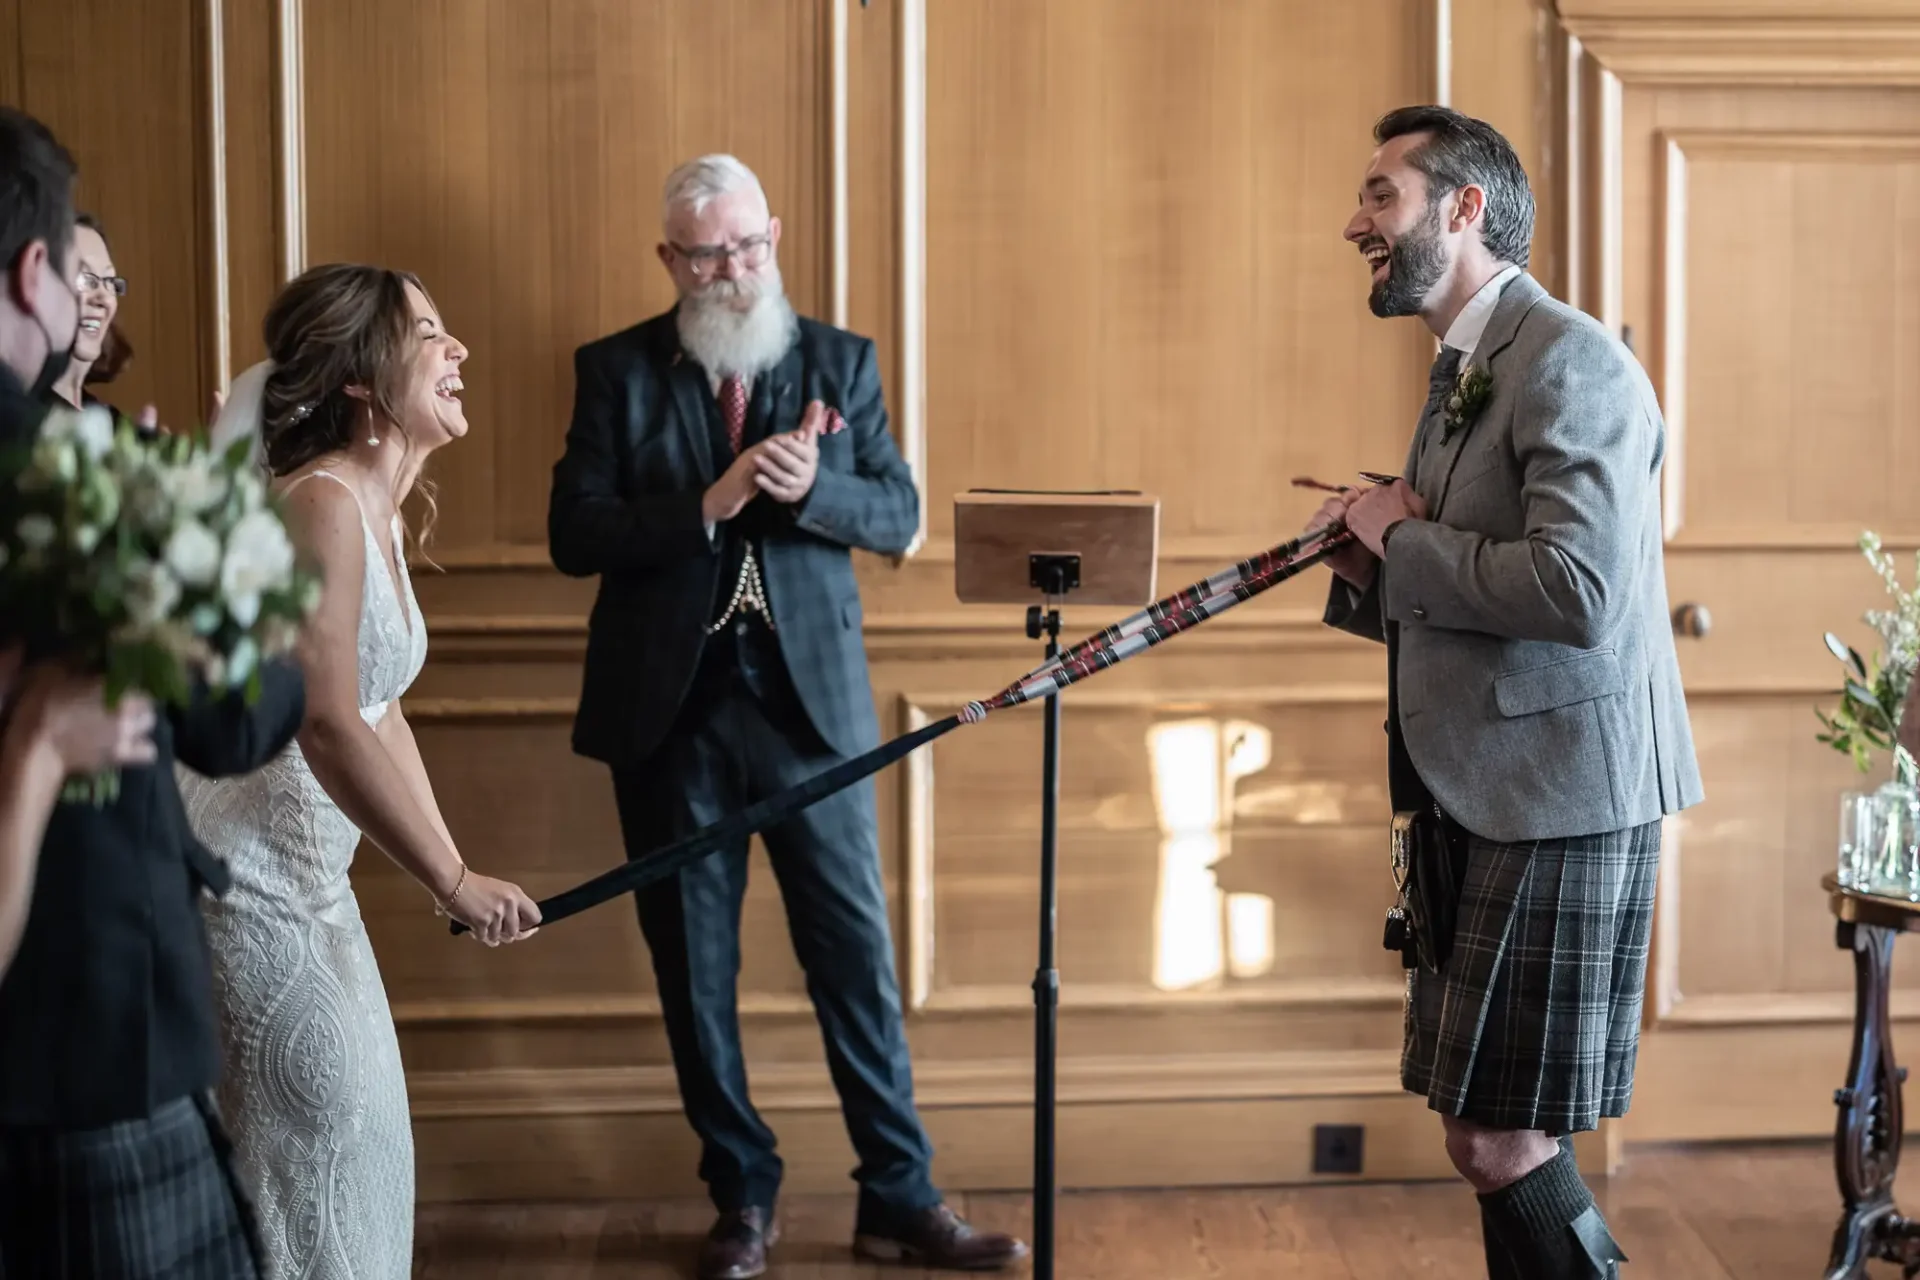 Bride and groom laugh joyously during a wedding ceremony led by an officiant in a wood-paneled room, with the groom wearing a traditional kilt.